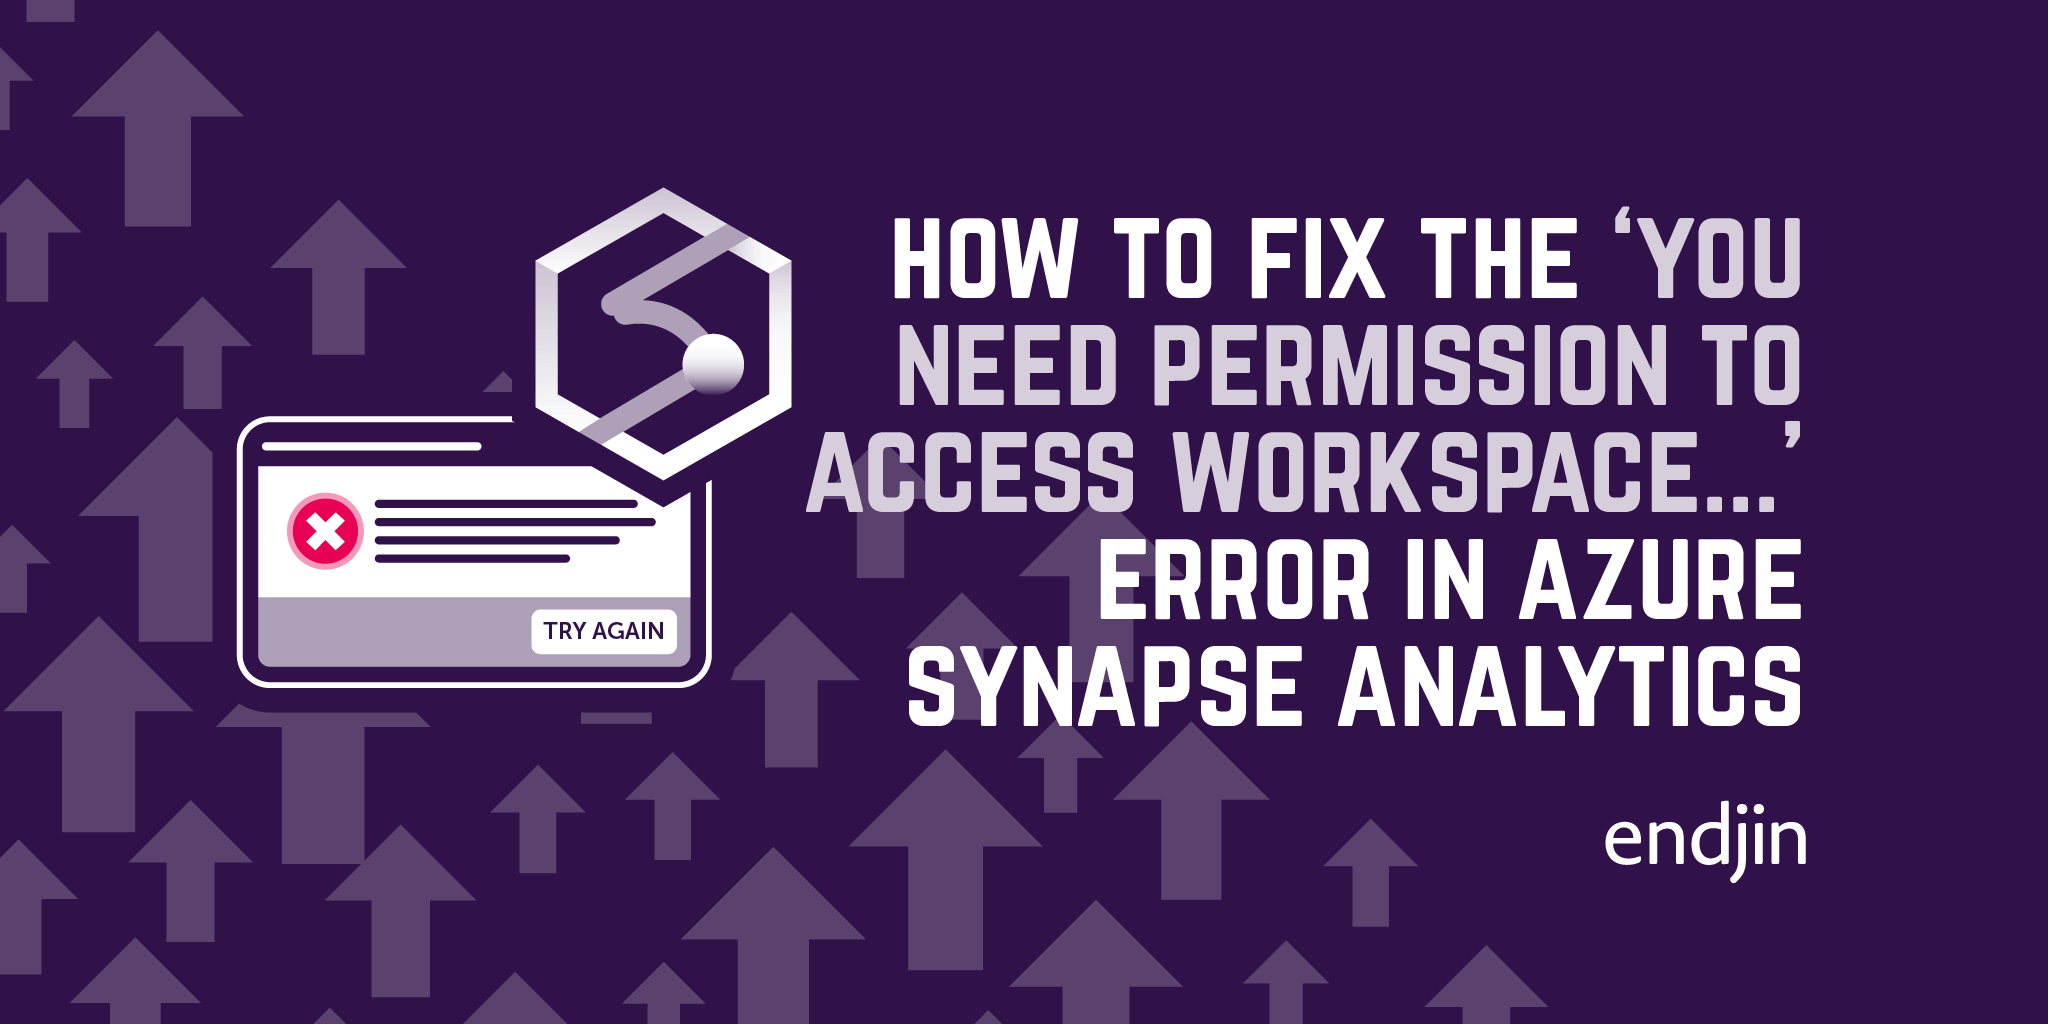 How to fix the "You need permission to access workspace..." error in Azure Synapse Analytics